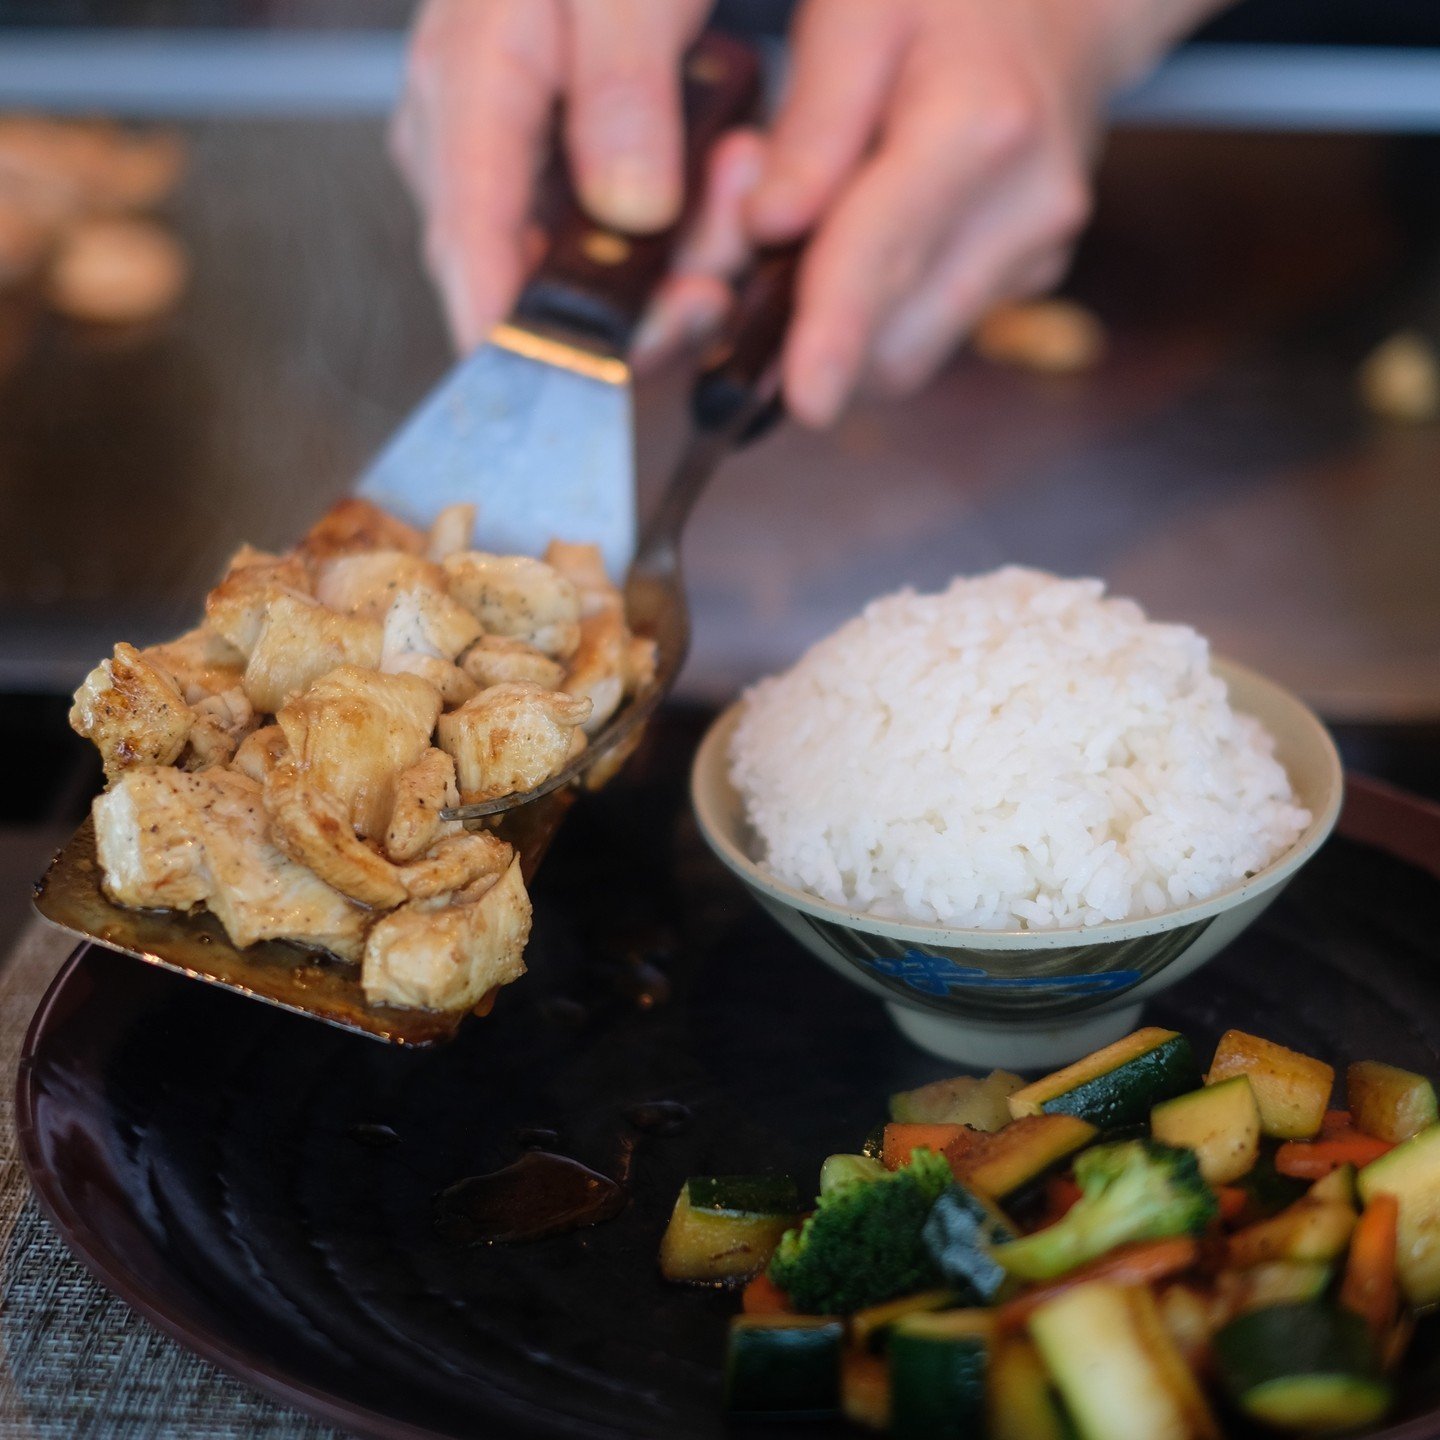 Elevate your dining experience with our exquisite hibachi entrees such as Jumbo Shrimp, Salmon, or Teriyaki Steak! Savor the flavors of Japan at Hana Japan Steak &amp; Seafood. 🍤🐟🥩